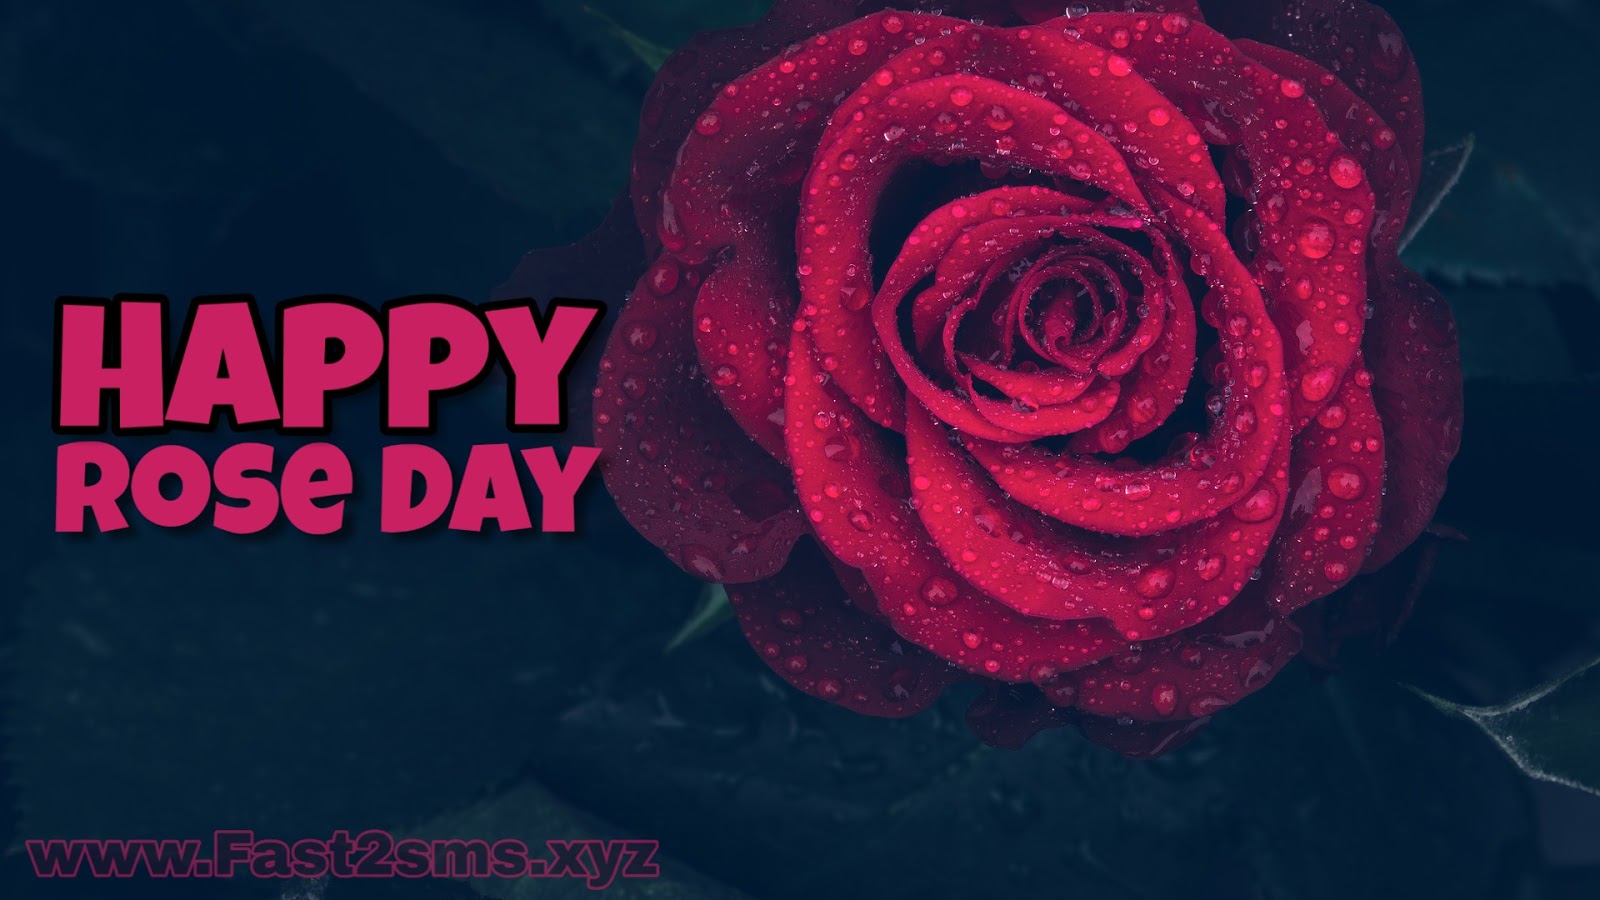 Rose Day Images By Fast2sms - Garden Roses , HD Wallpaper & Backgrounds